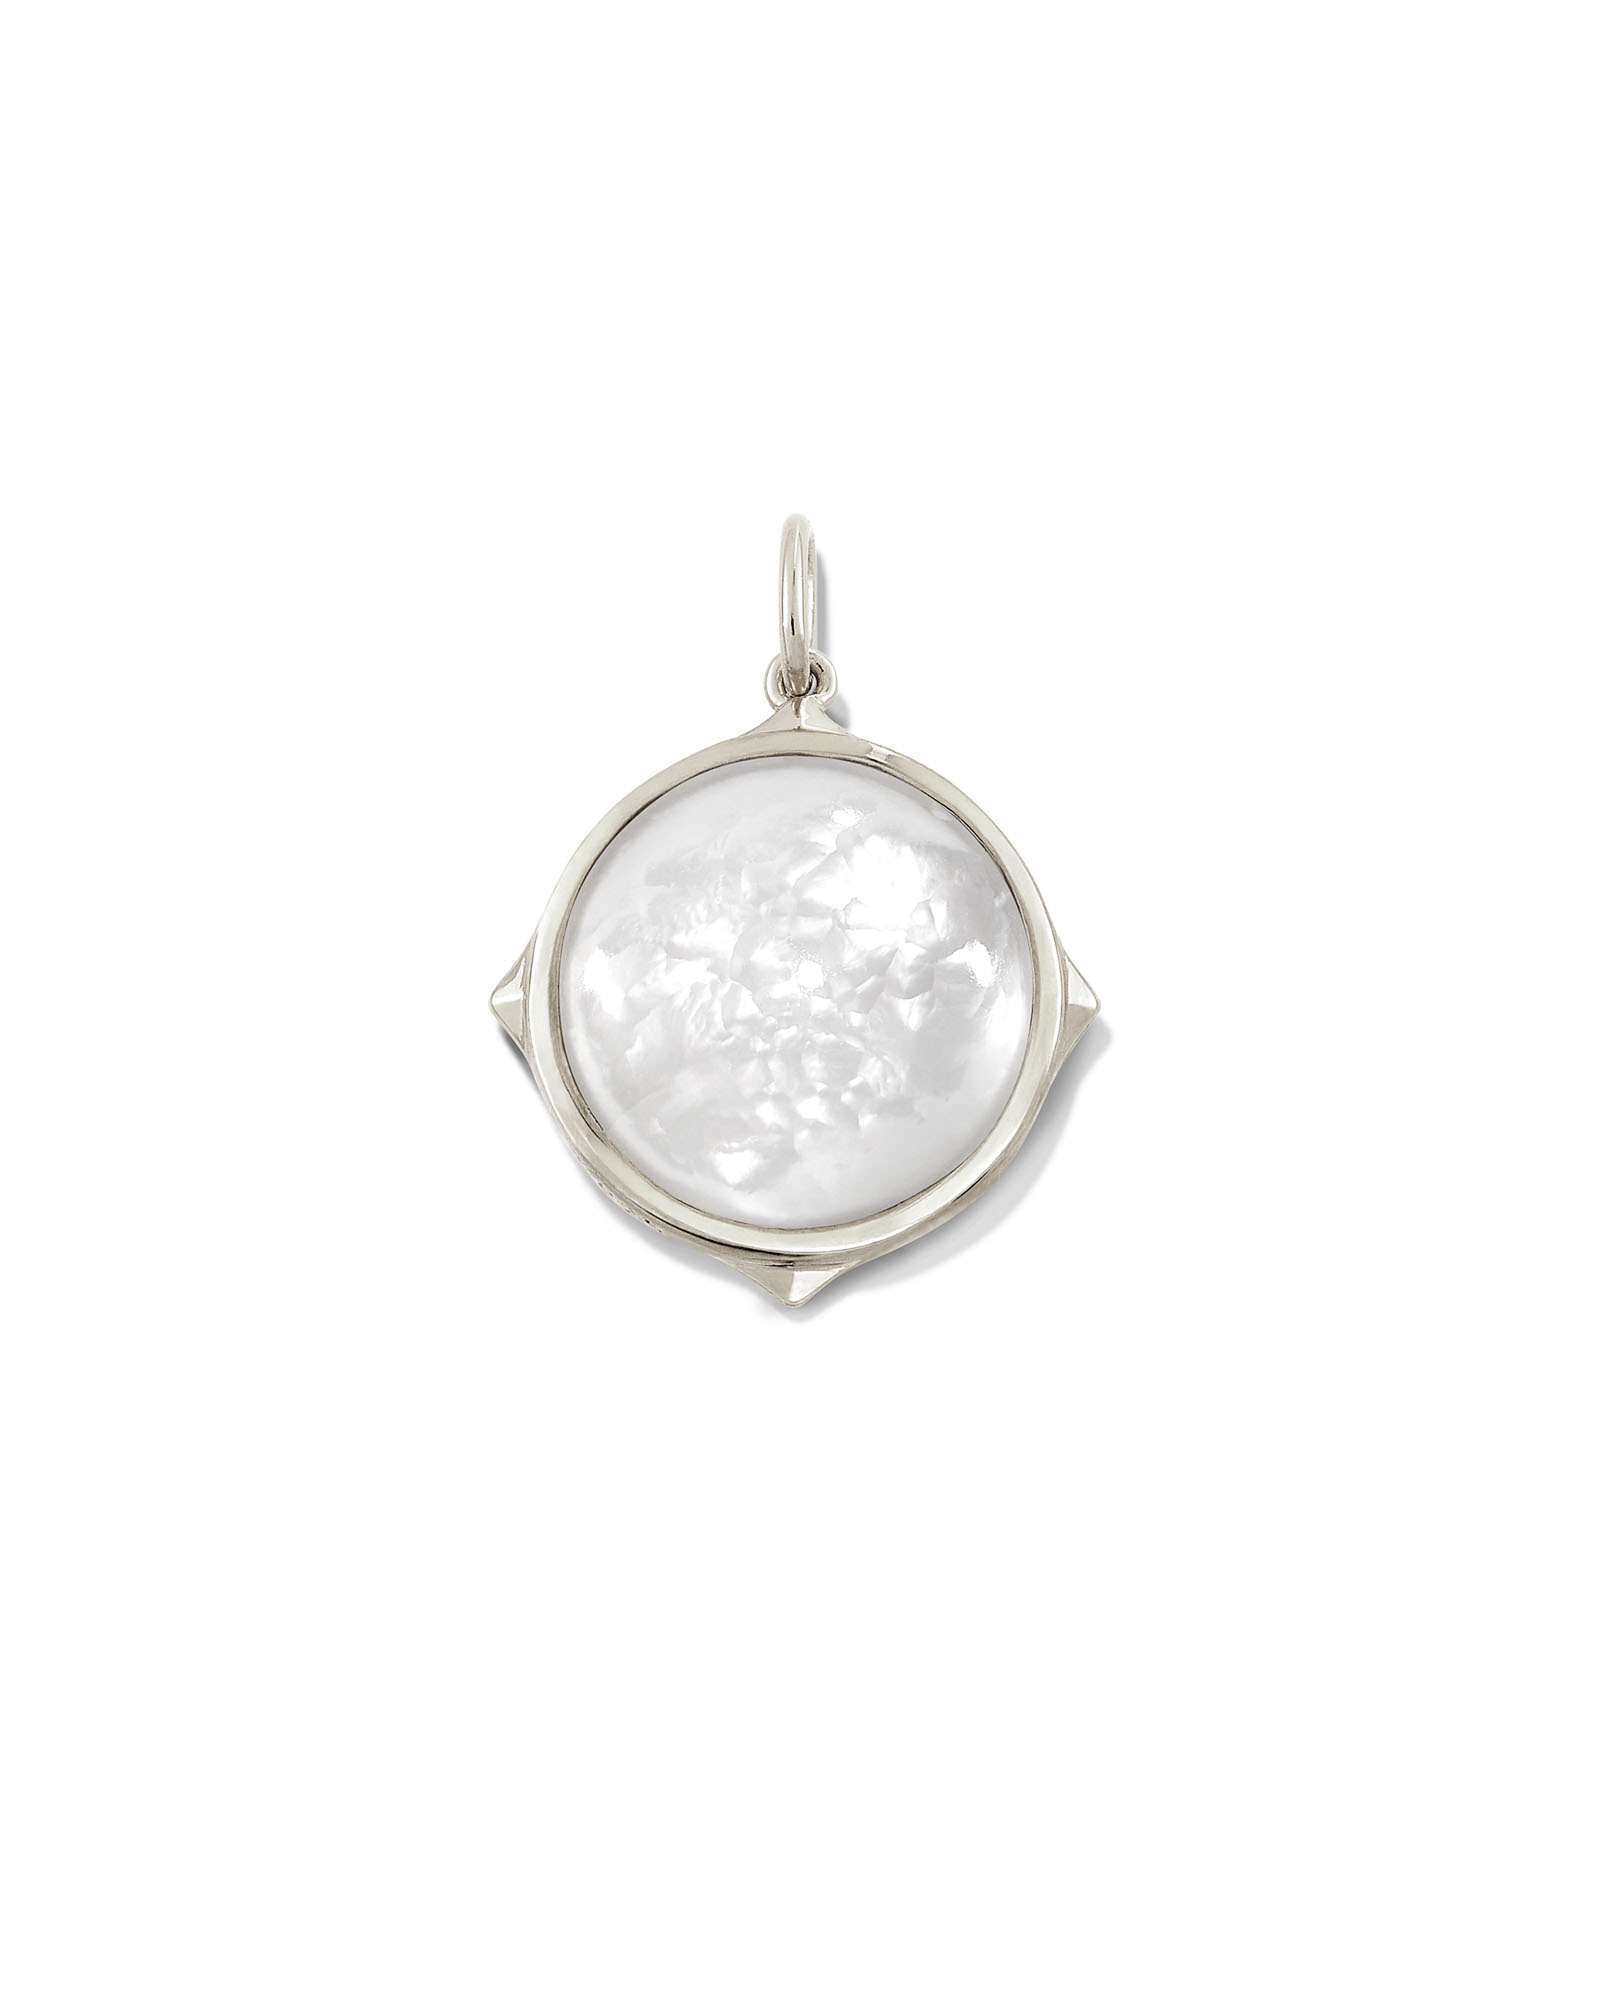 Matilda Sterling Silver Stone Charm in Ivory Mother-Of-Pearl | Kendra Scott